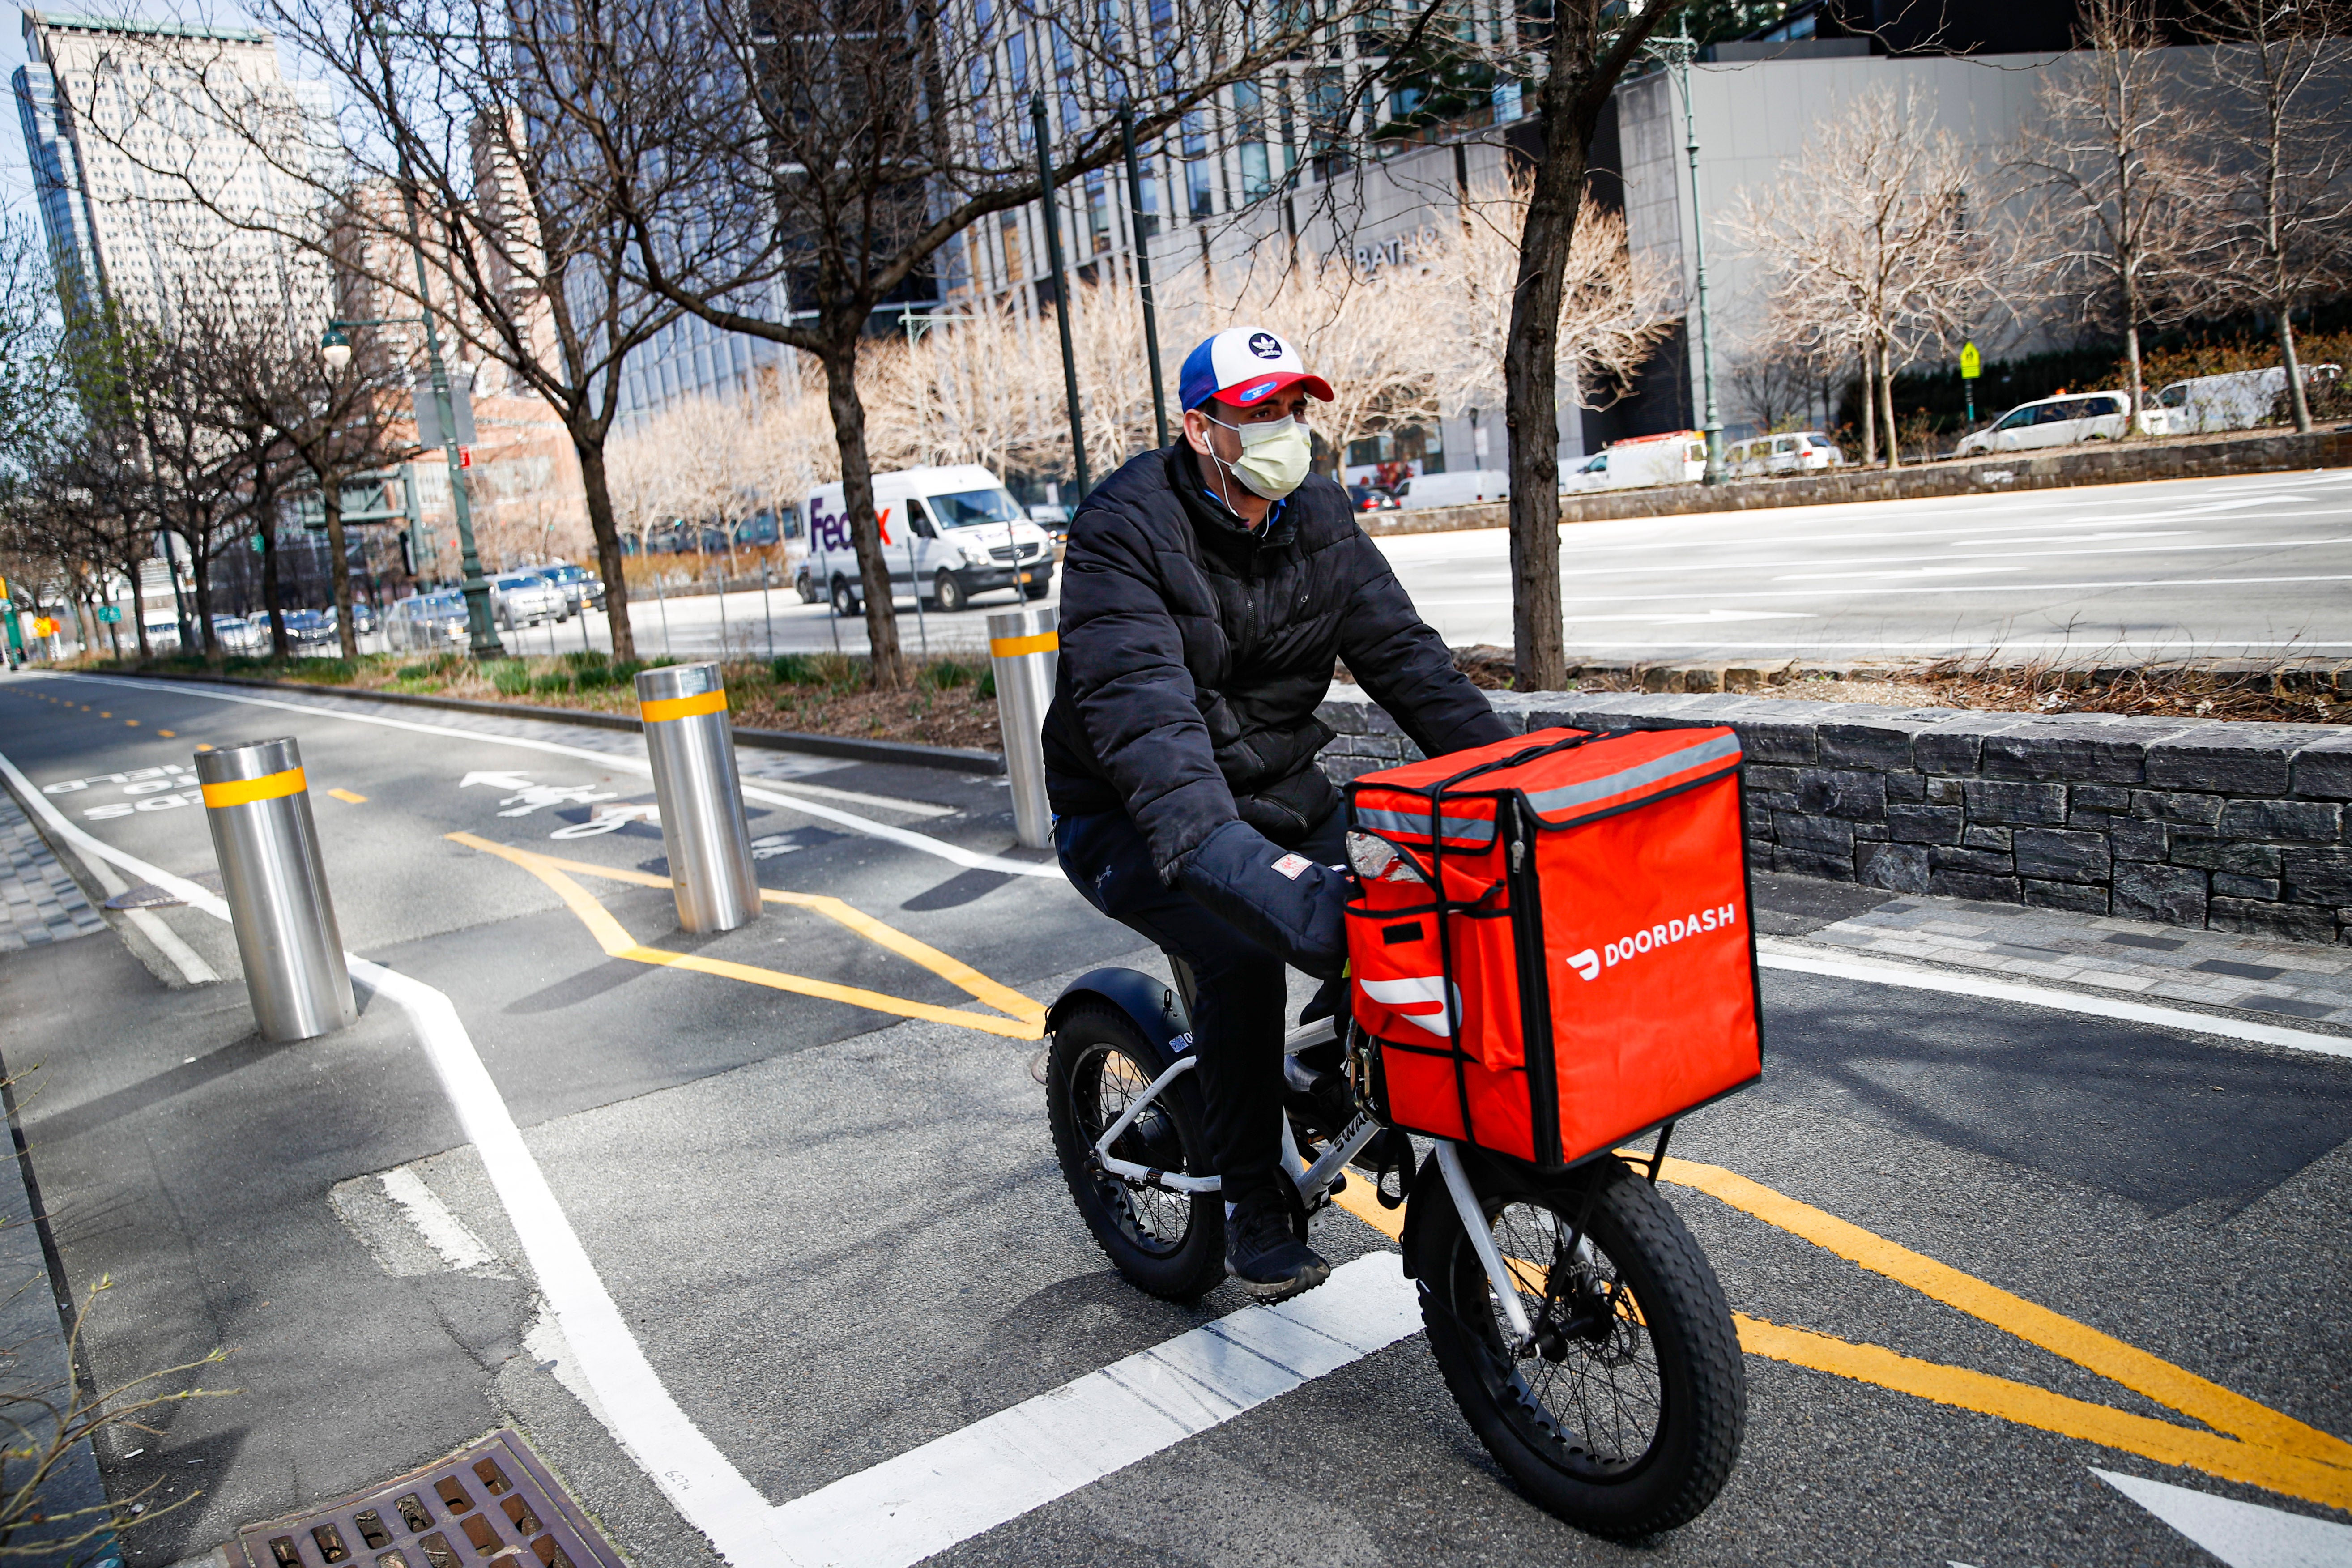 DoorDash was critisied in 2019 for withholding tips from drivers